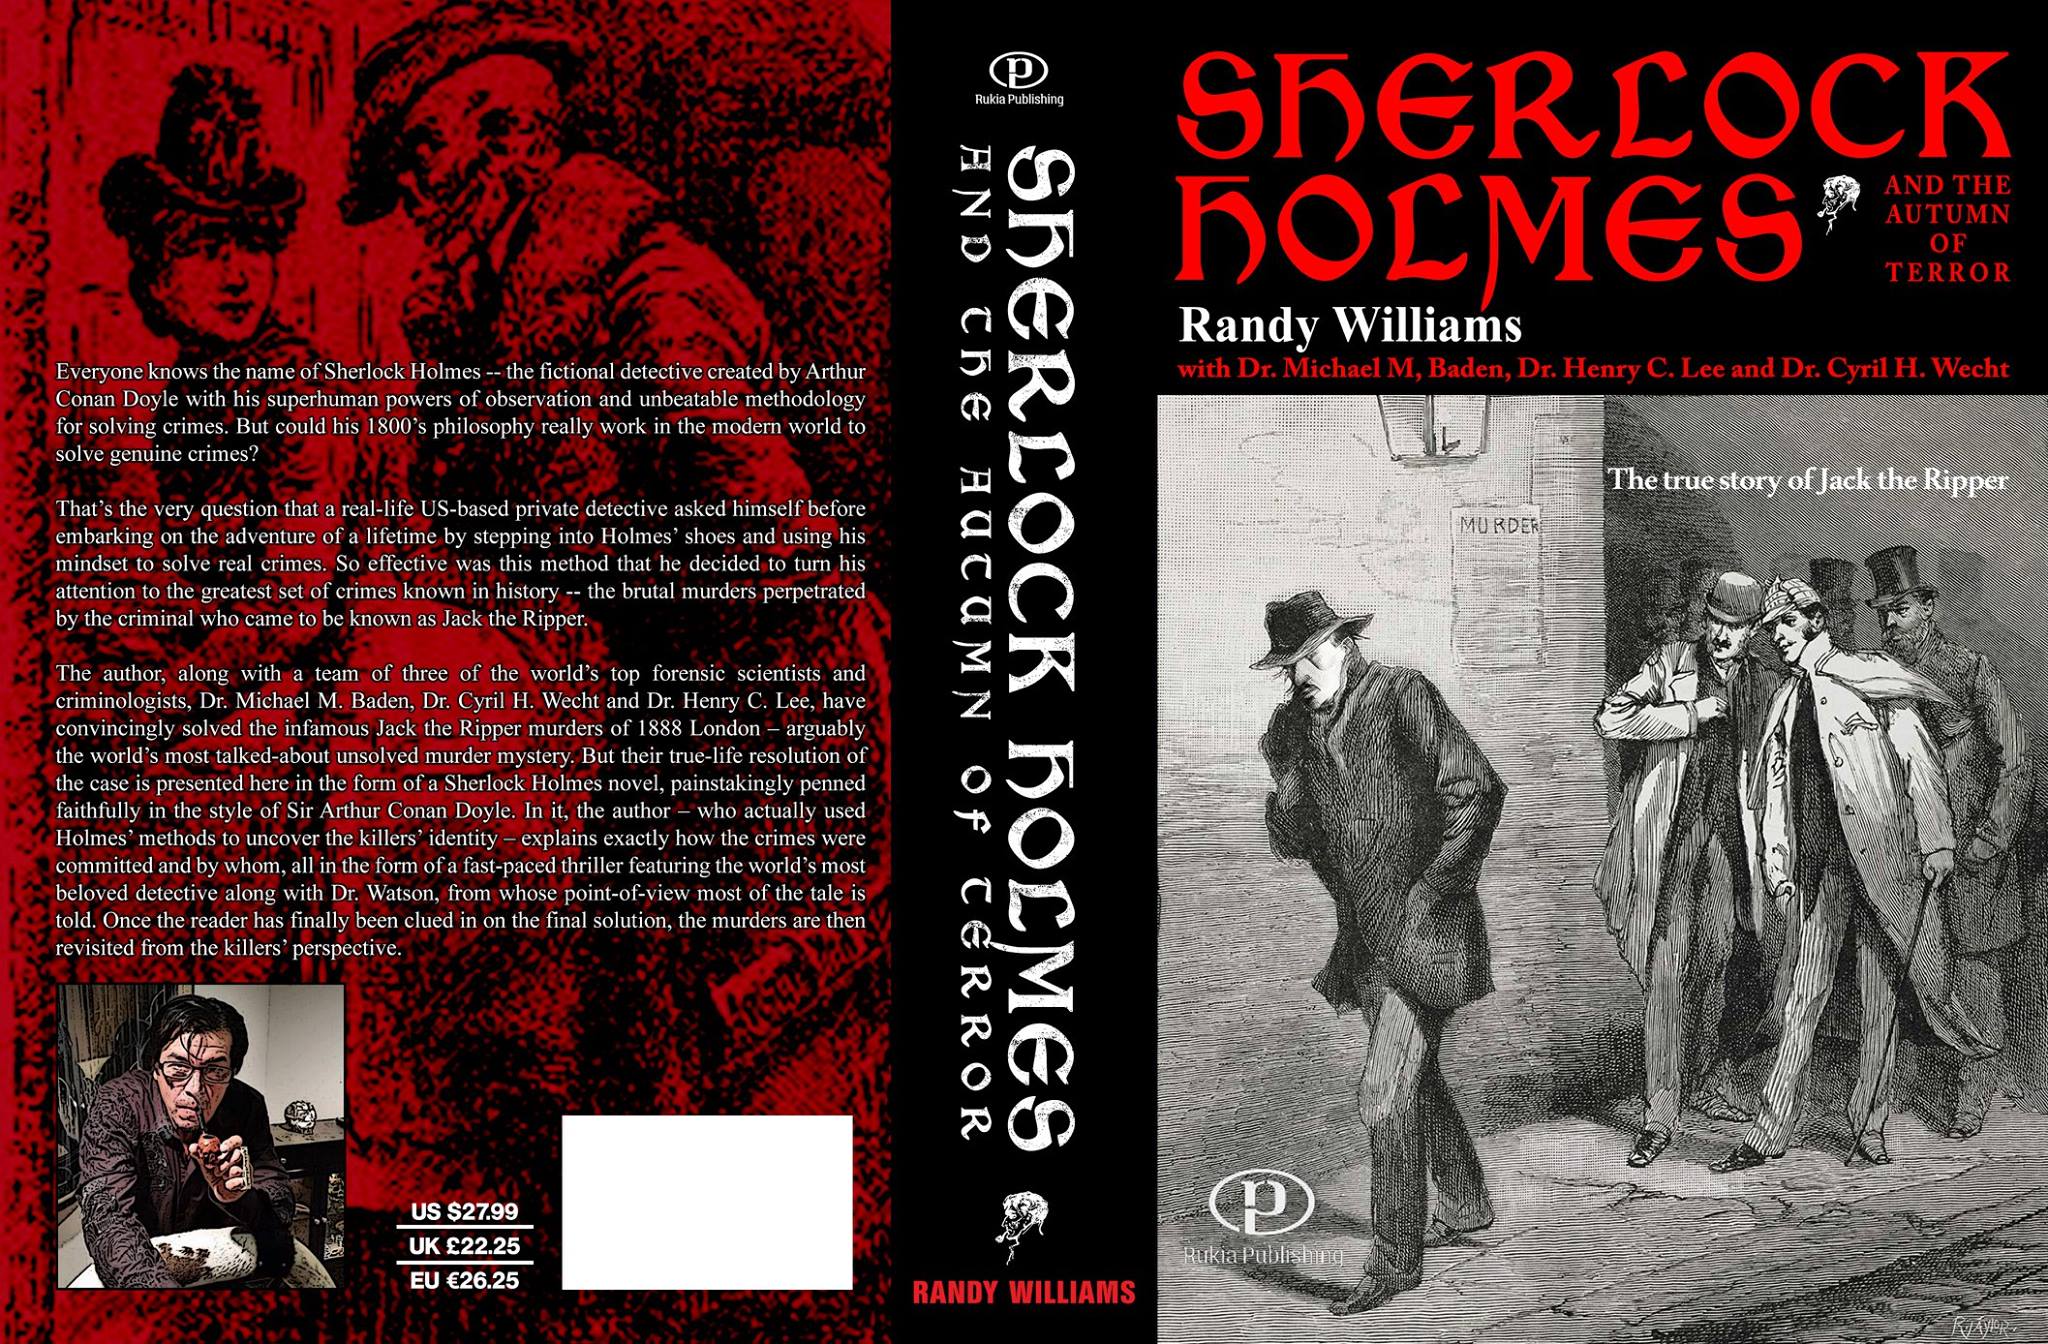 Sherlock Holmes and the Autumn of Terror